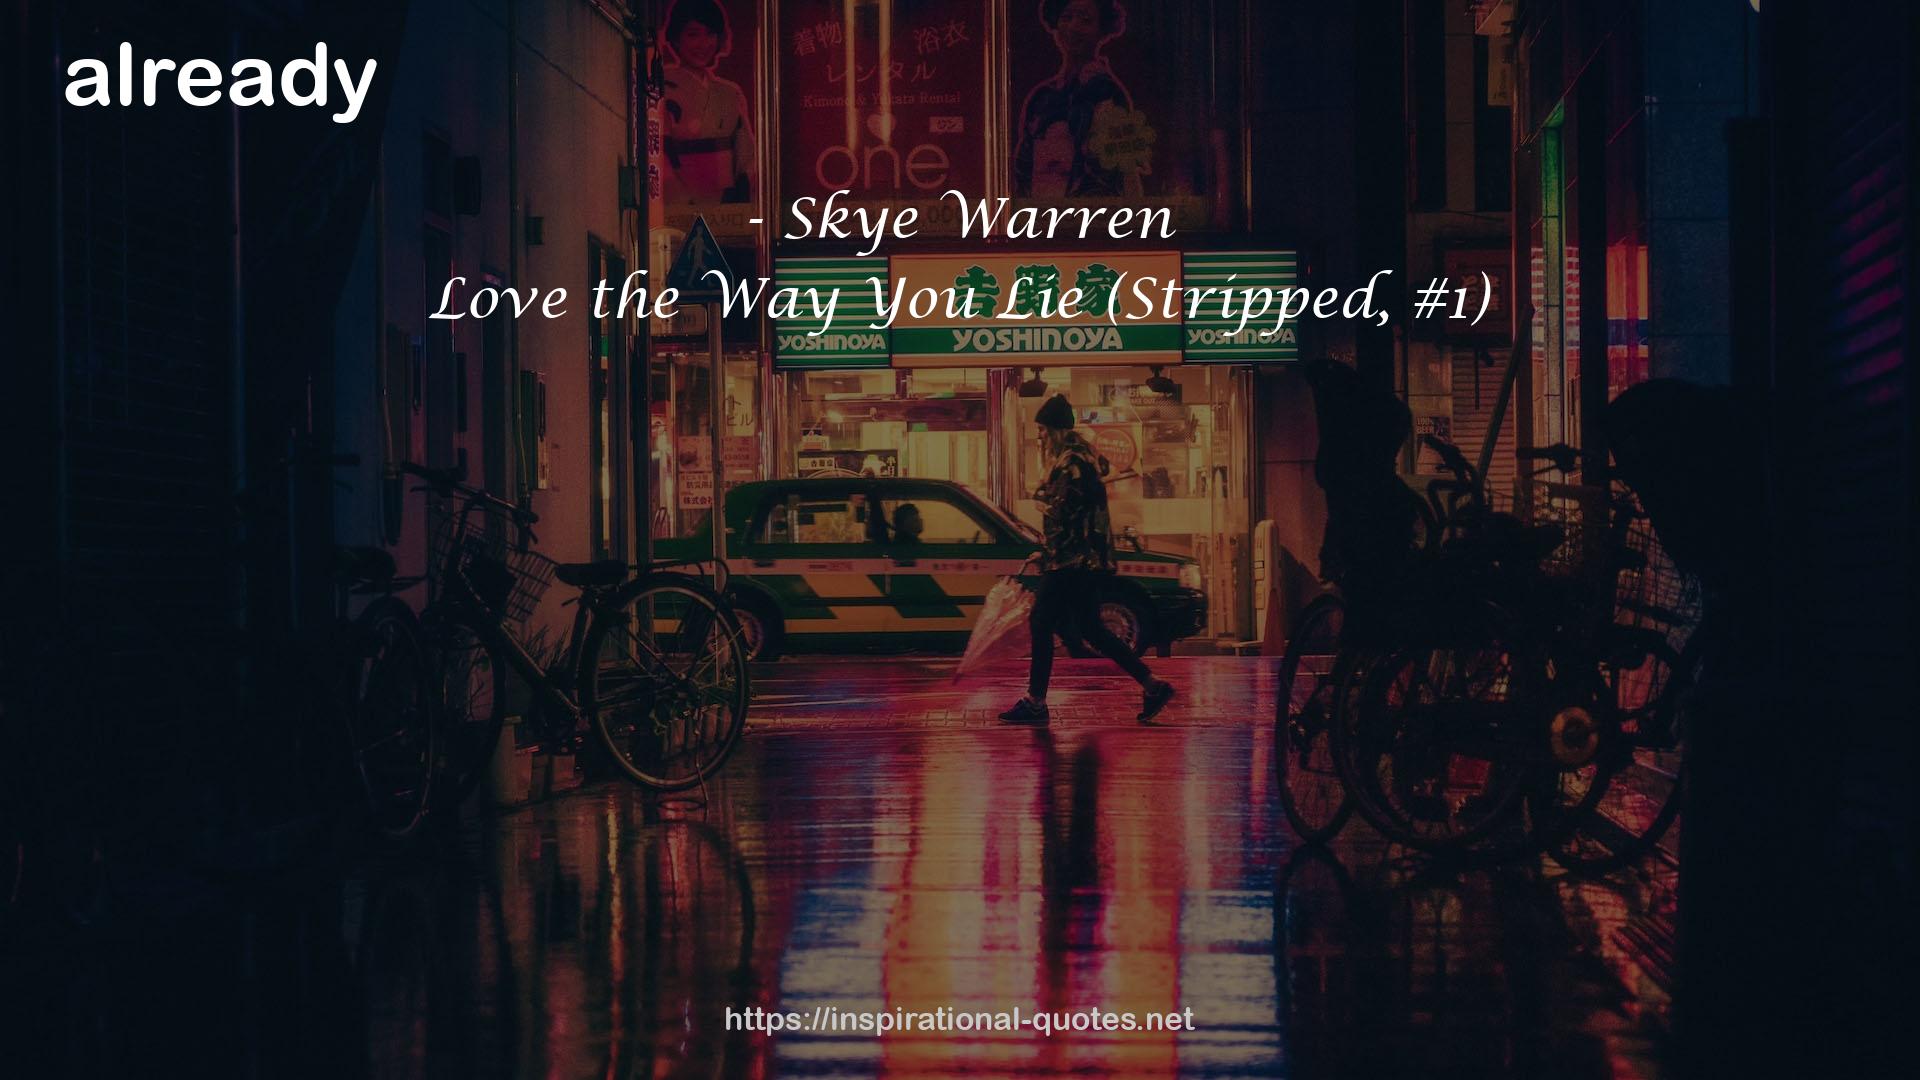 Love the Way You Lie (Stripped, #1) QUOTES